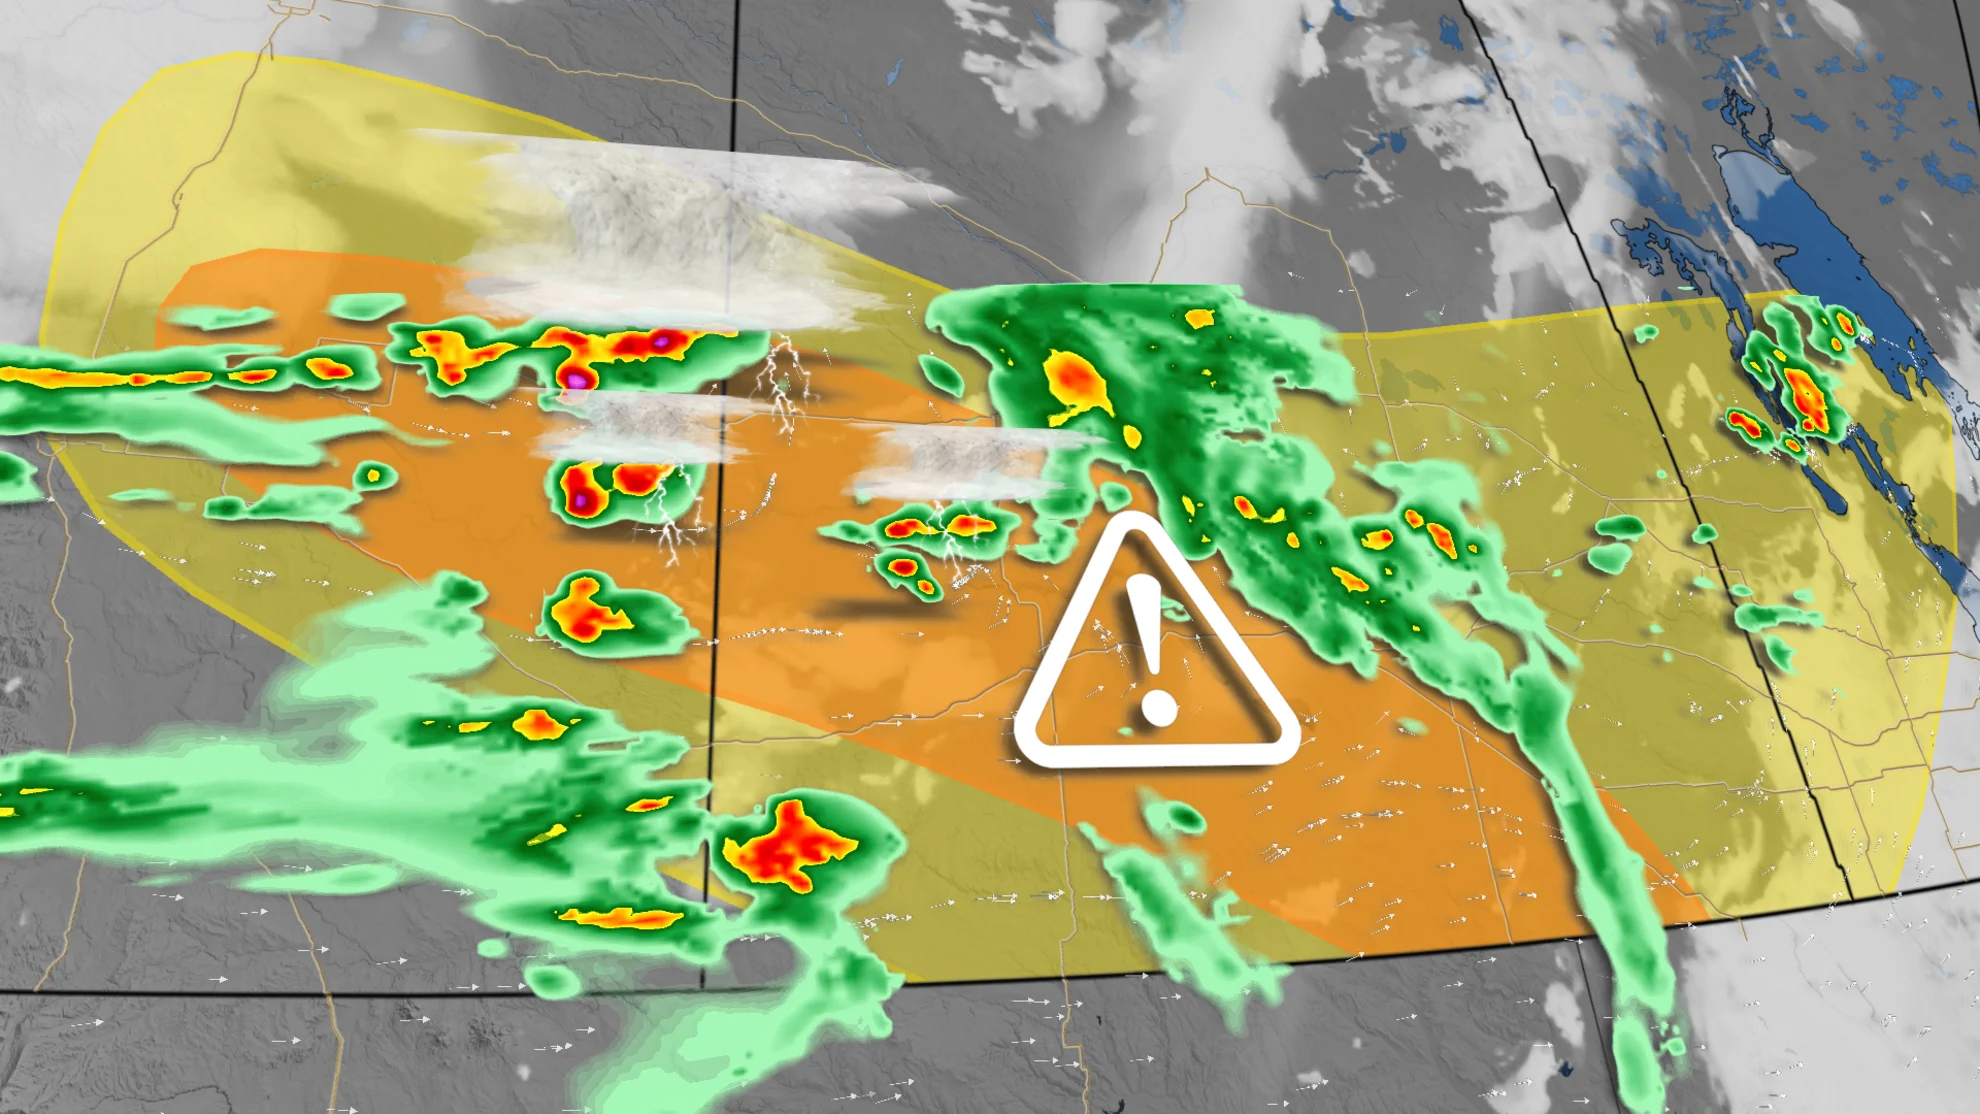 A severe thunderstorm threat returns, with the risk for some damaging winds in the Winnipeg area on Friday. Details, here